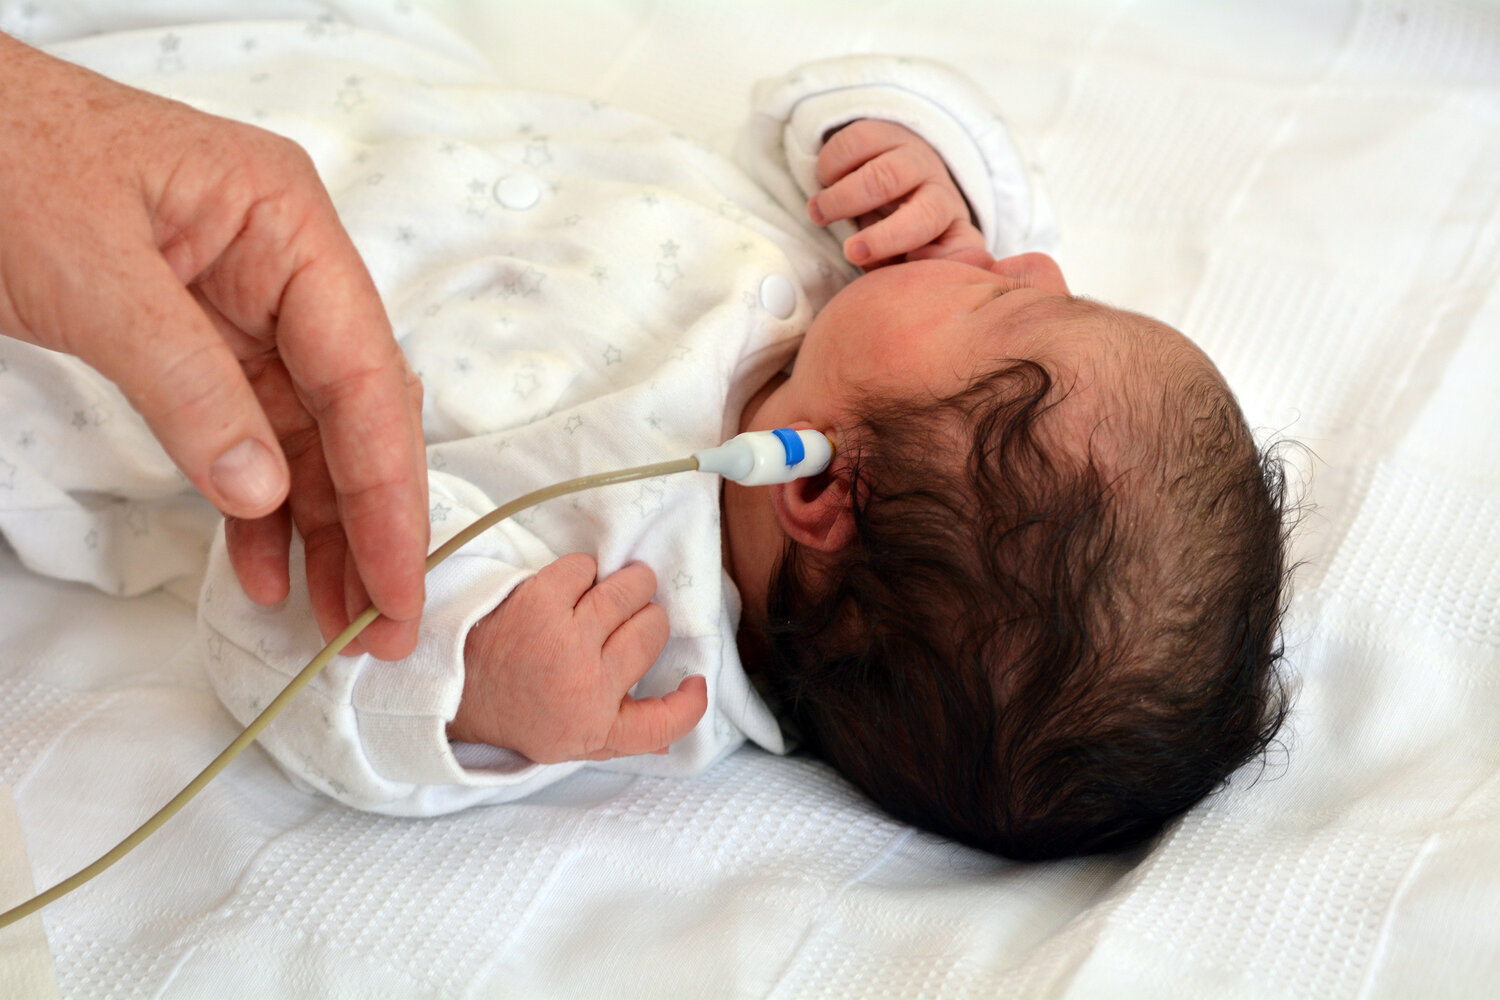 Newborn hearing loss is the most common disorder at birth